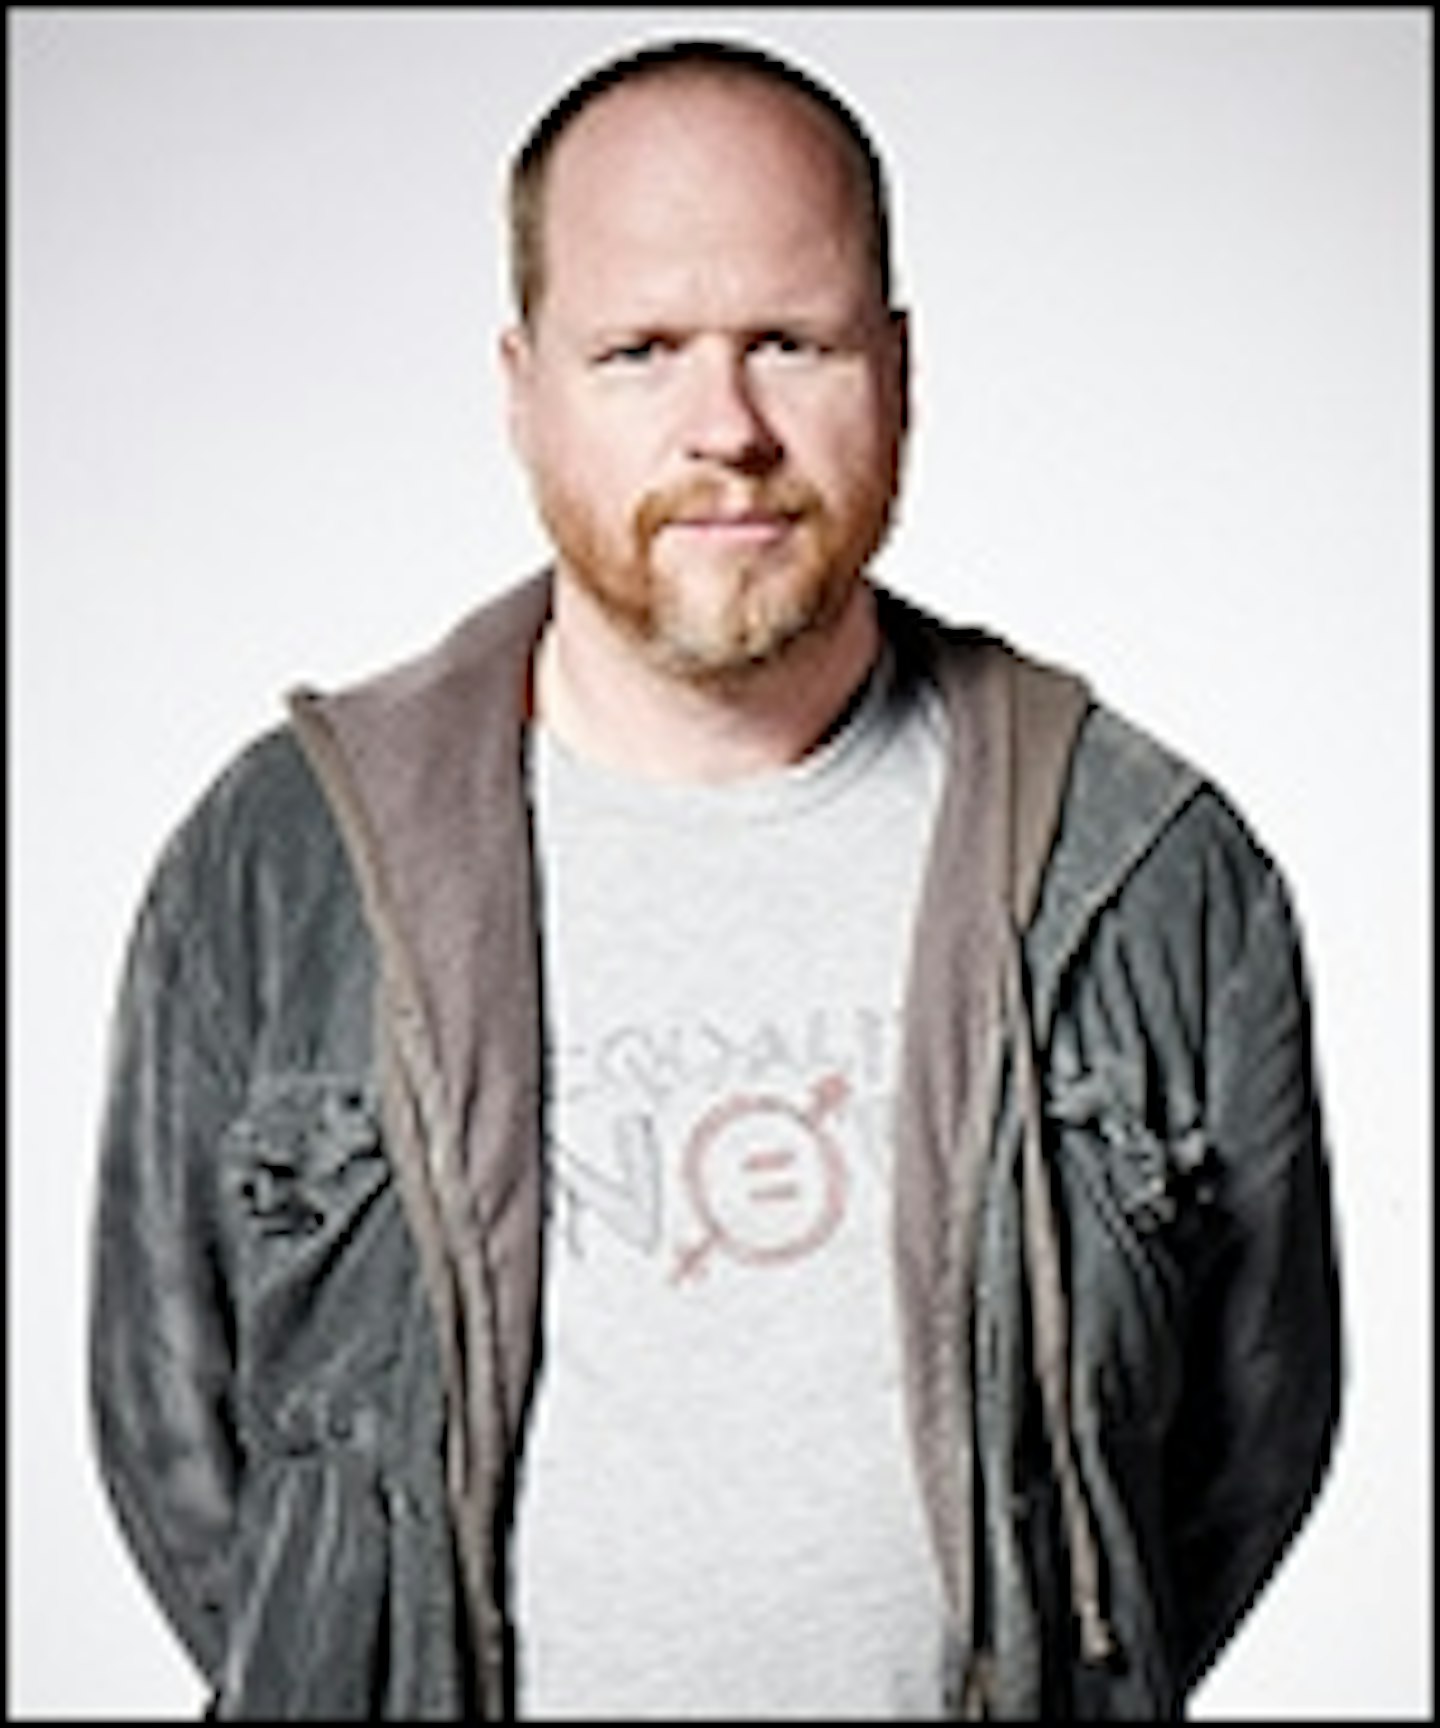 Joss Whedon Distributing In Your Eyes Online